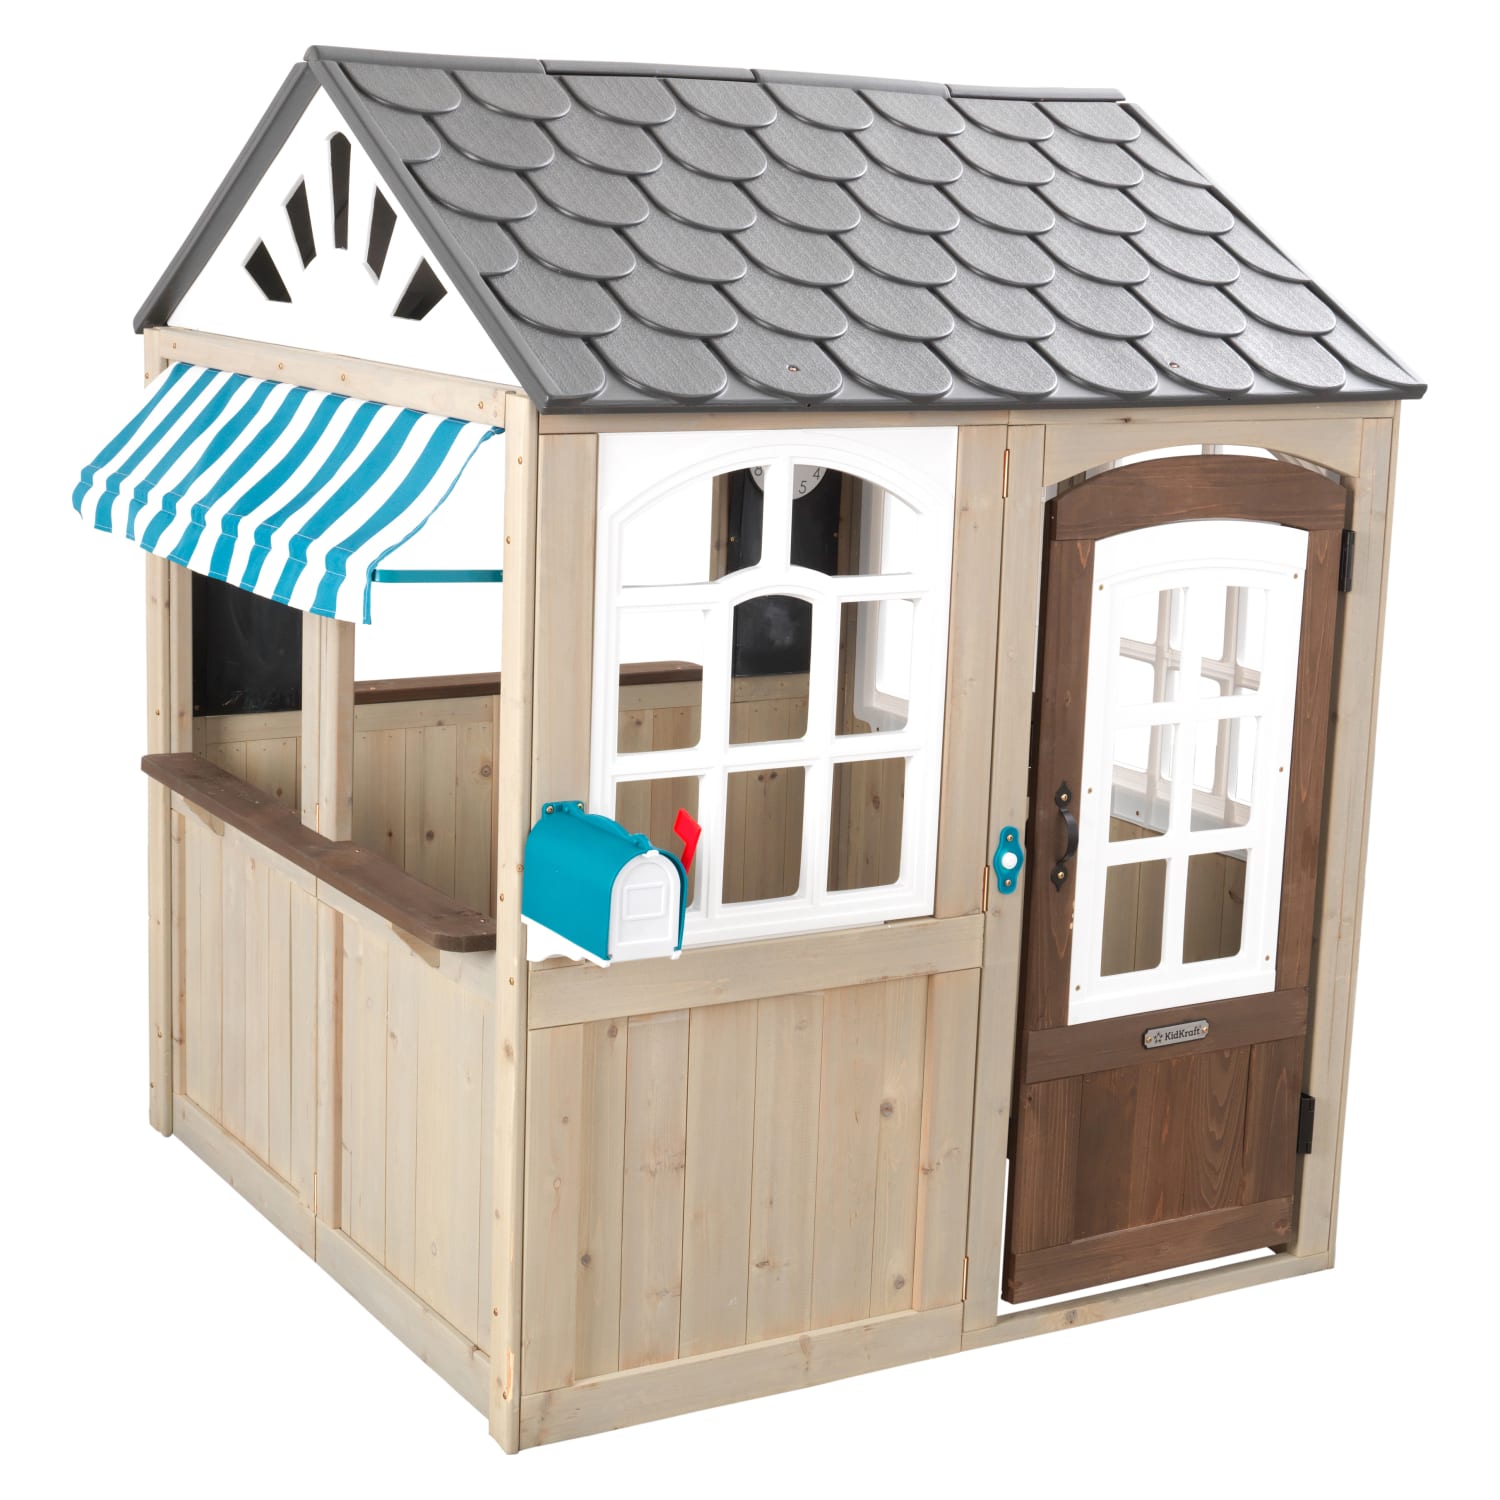 KidKraft Hillcrest Wooden Outdoor Playhouse with EZ Kraft Assembly, Ringing Doorbell and Mailbox